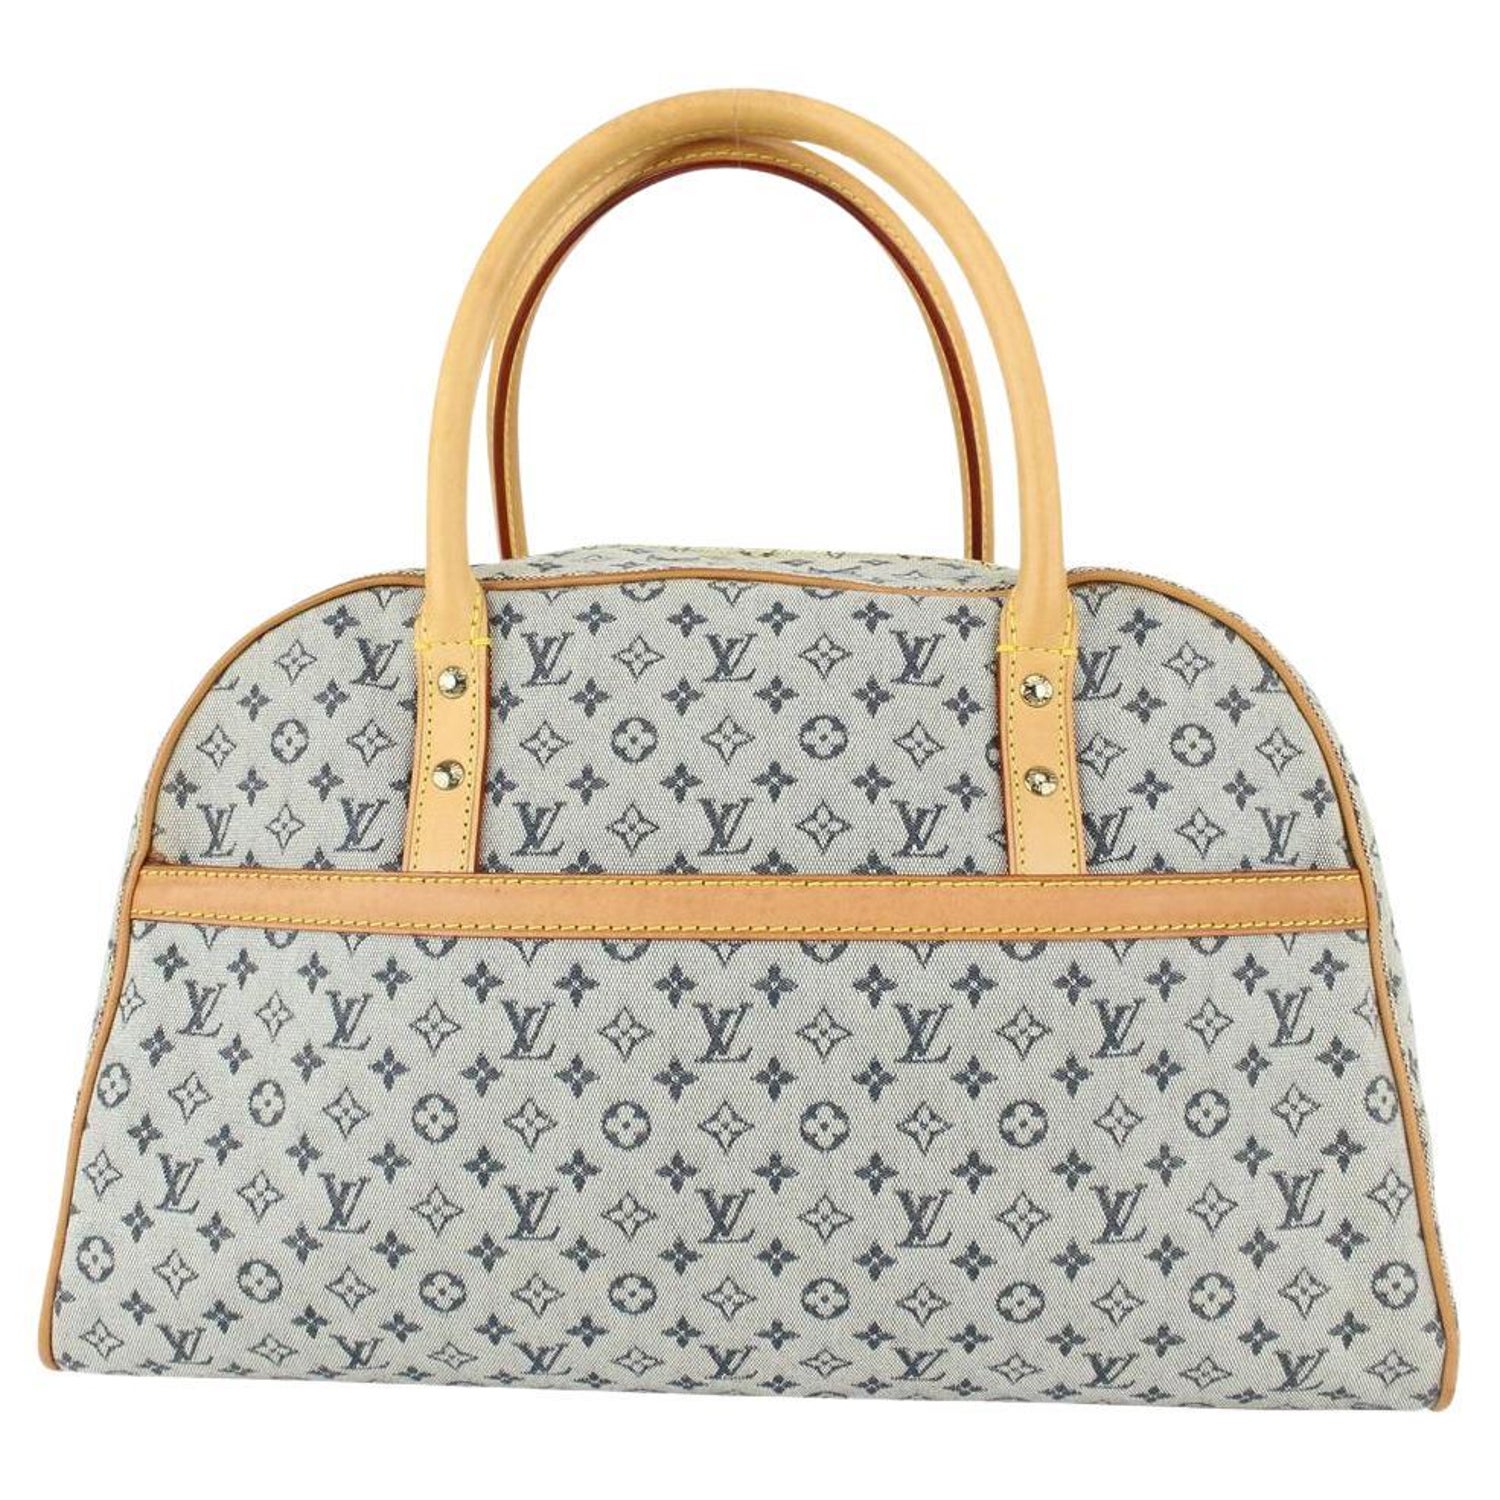 The Louis Vuitton Pochette Accessories - Am I crazy for buying it in 2022?  